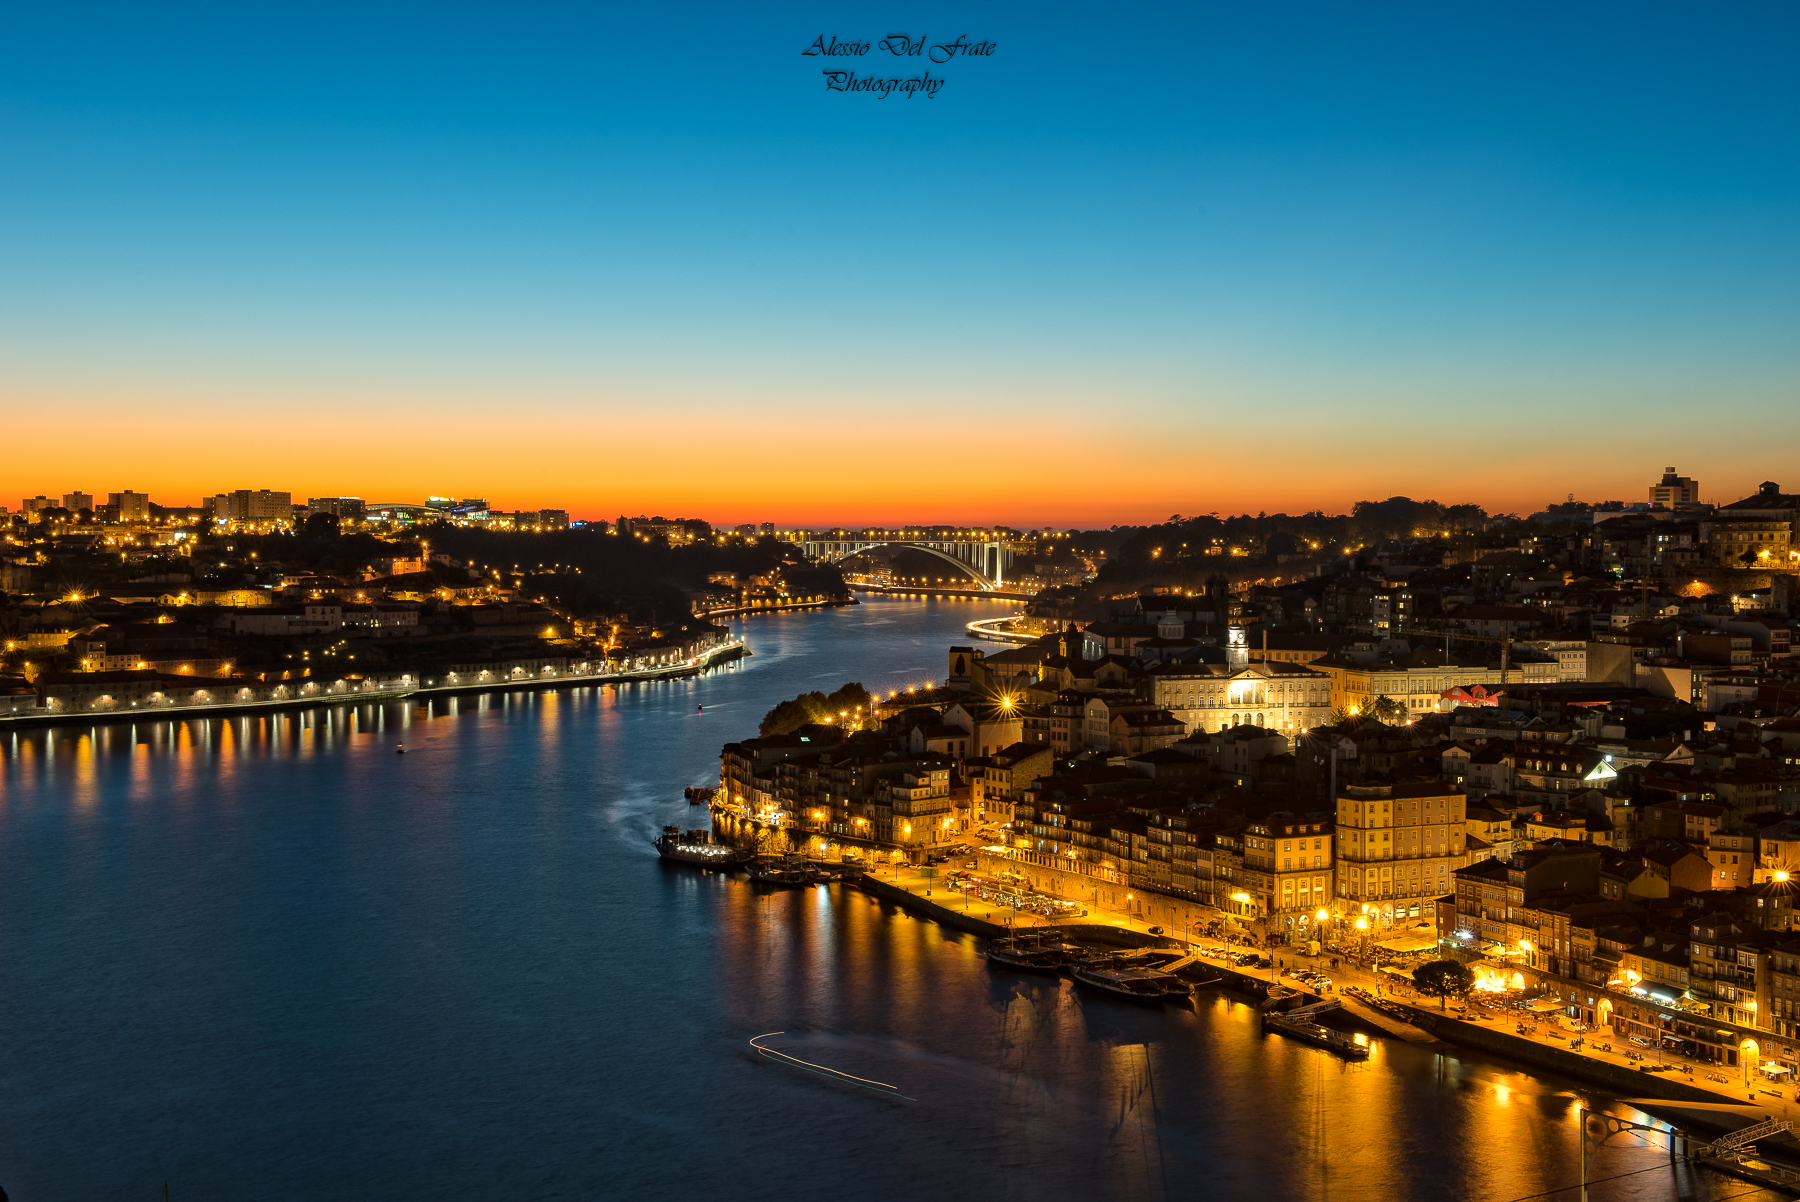 A Sunset over the Douro !!!...